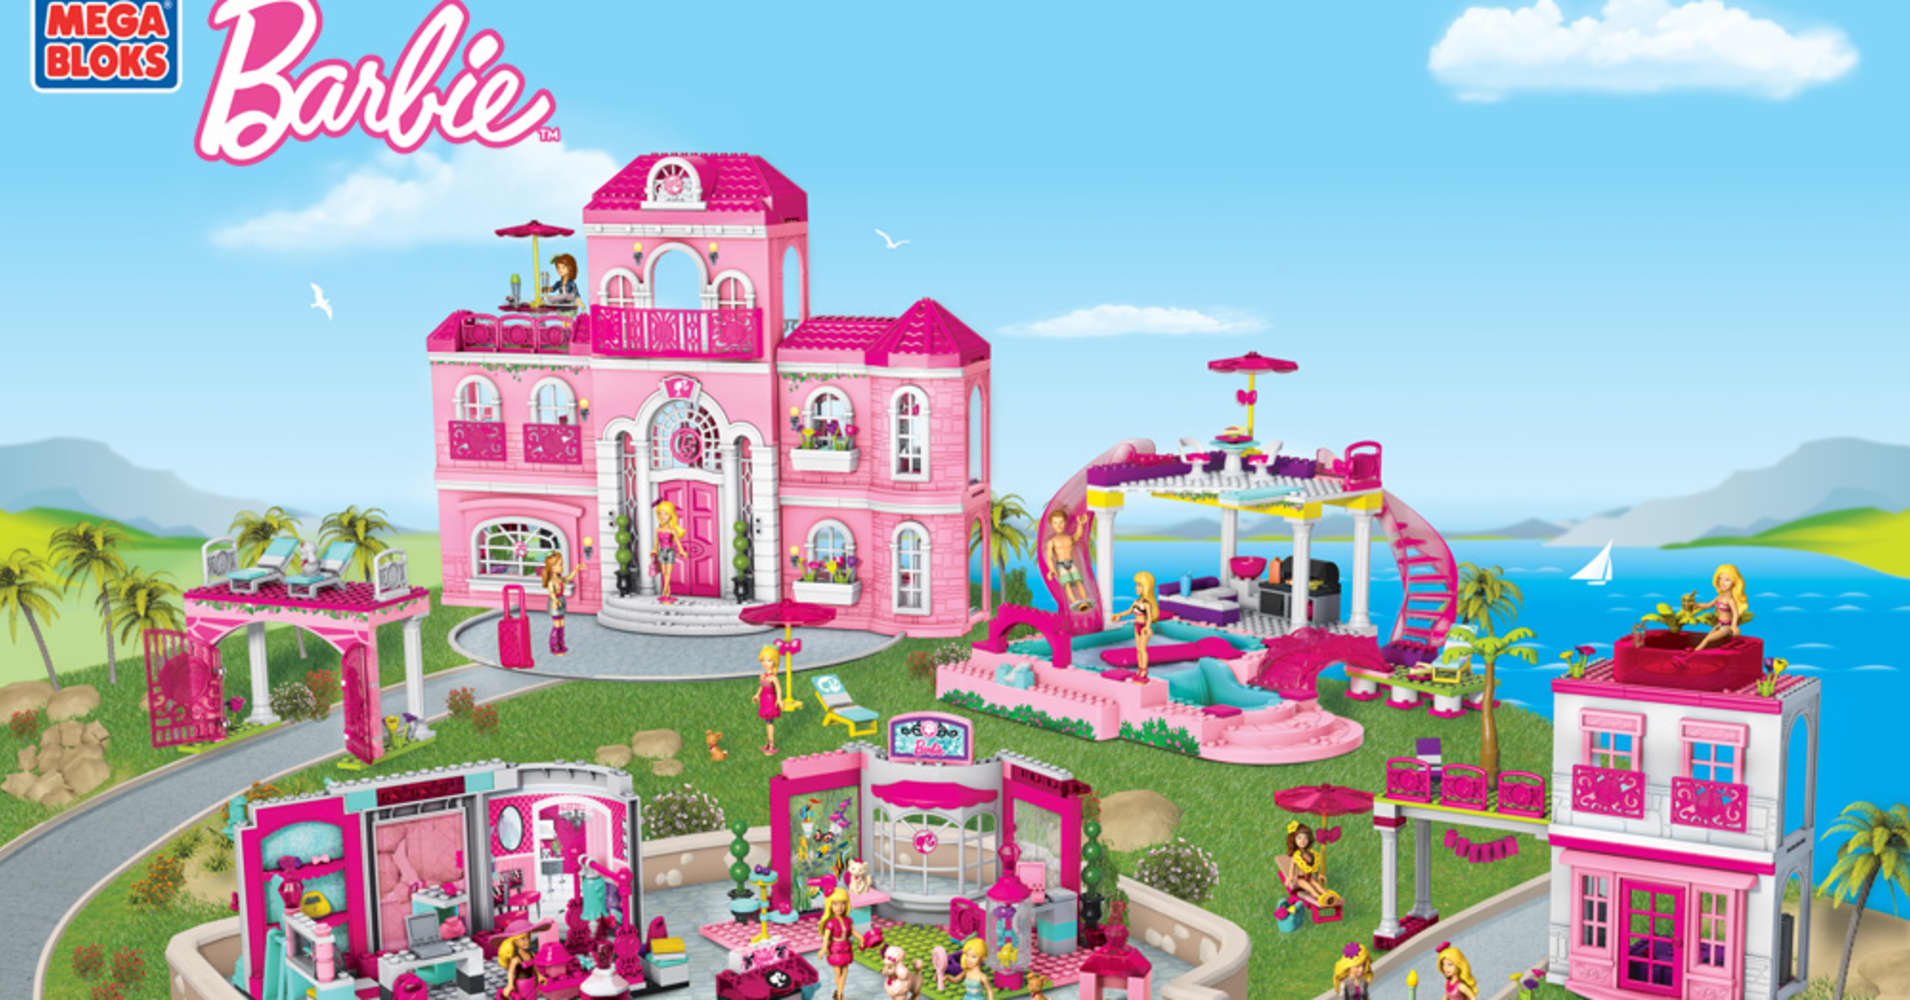 More Dads Buy the Toys, So Barbie, and Stores, Get Makeovers